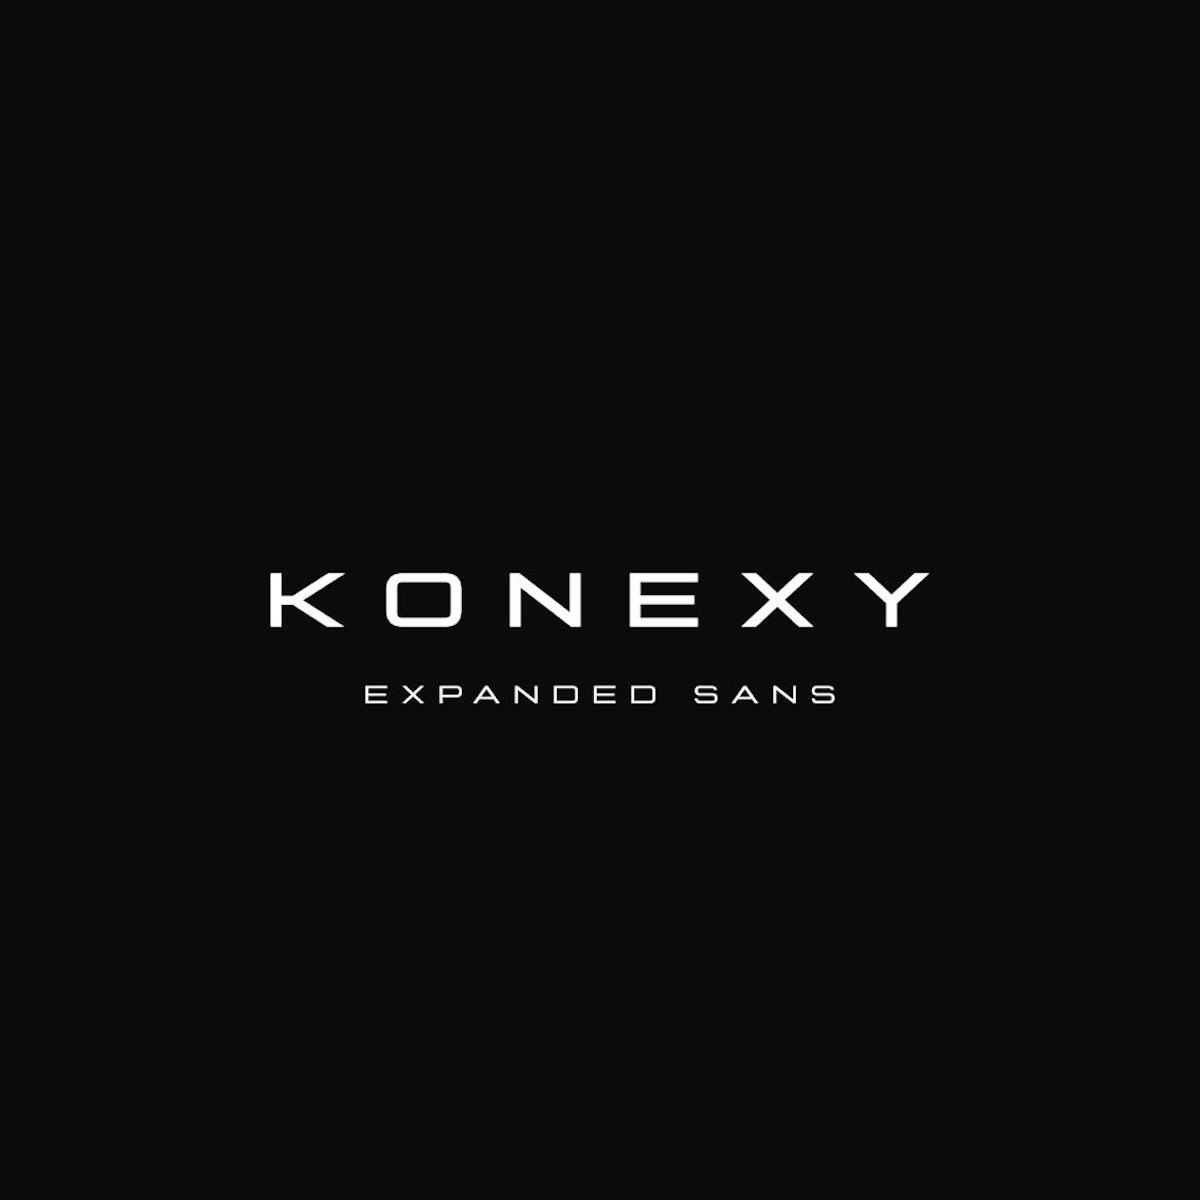 Konexy, a new font on Type Department.